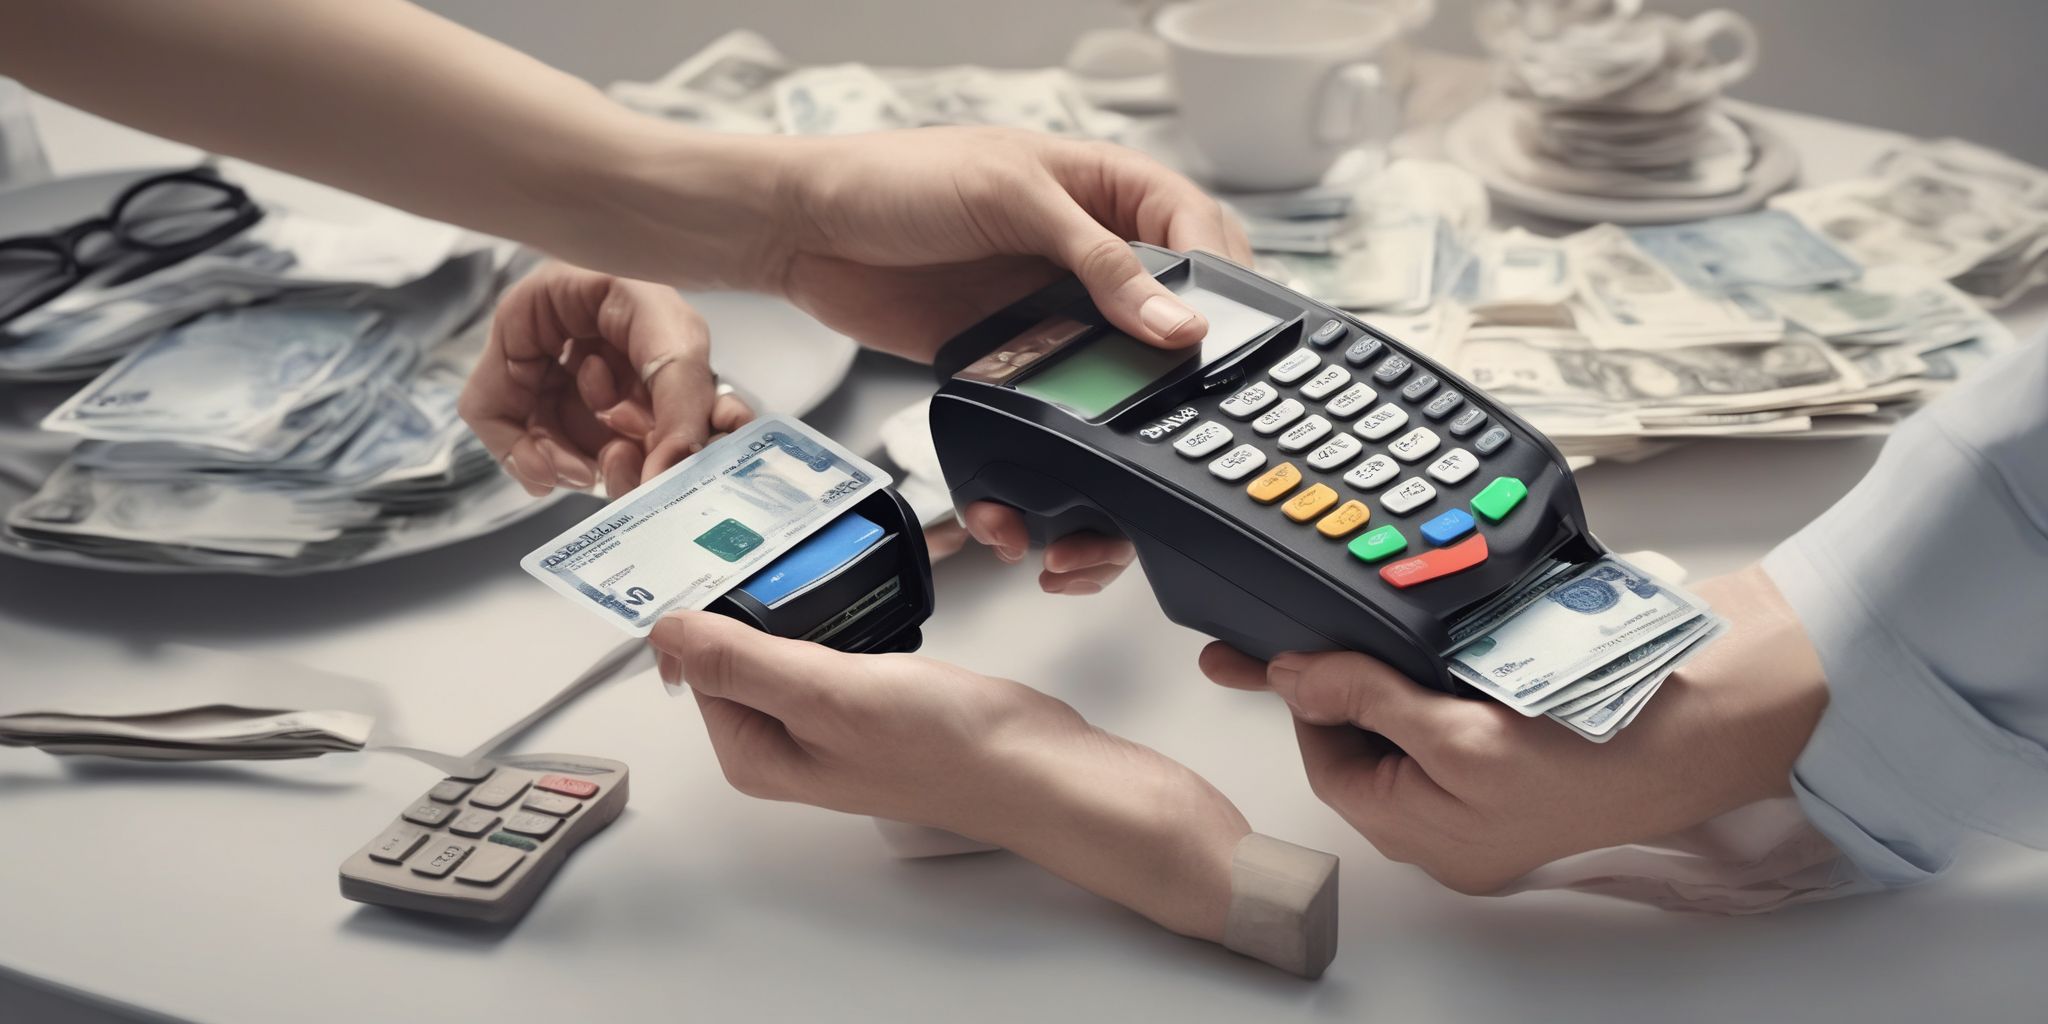 Payments  in realistic, photographic style